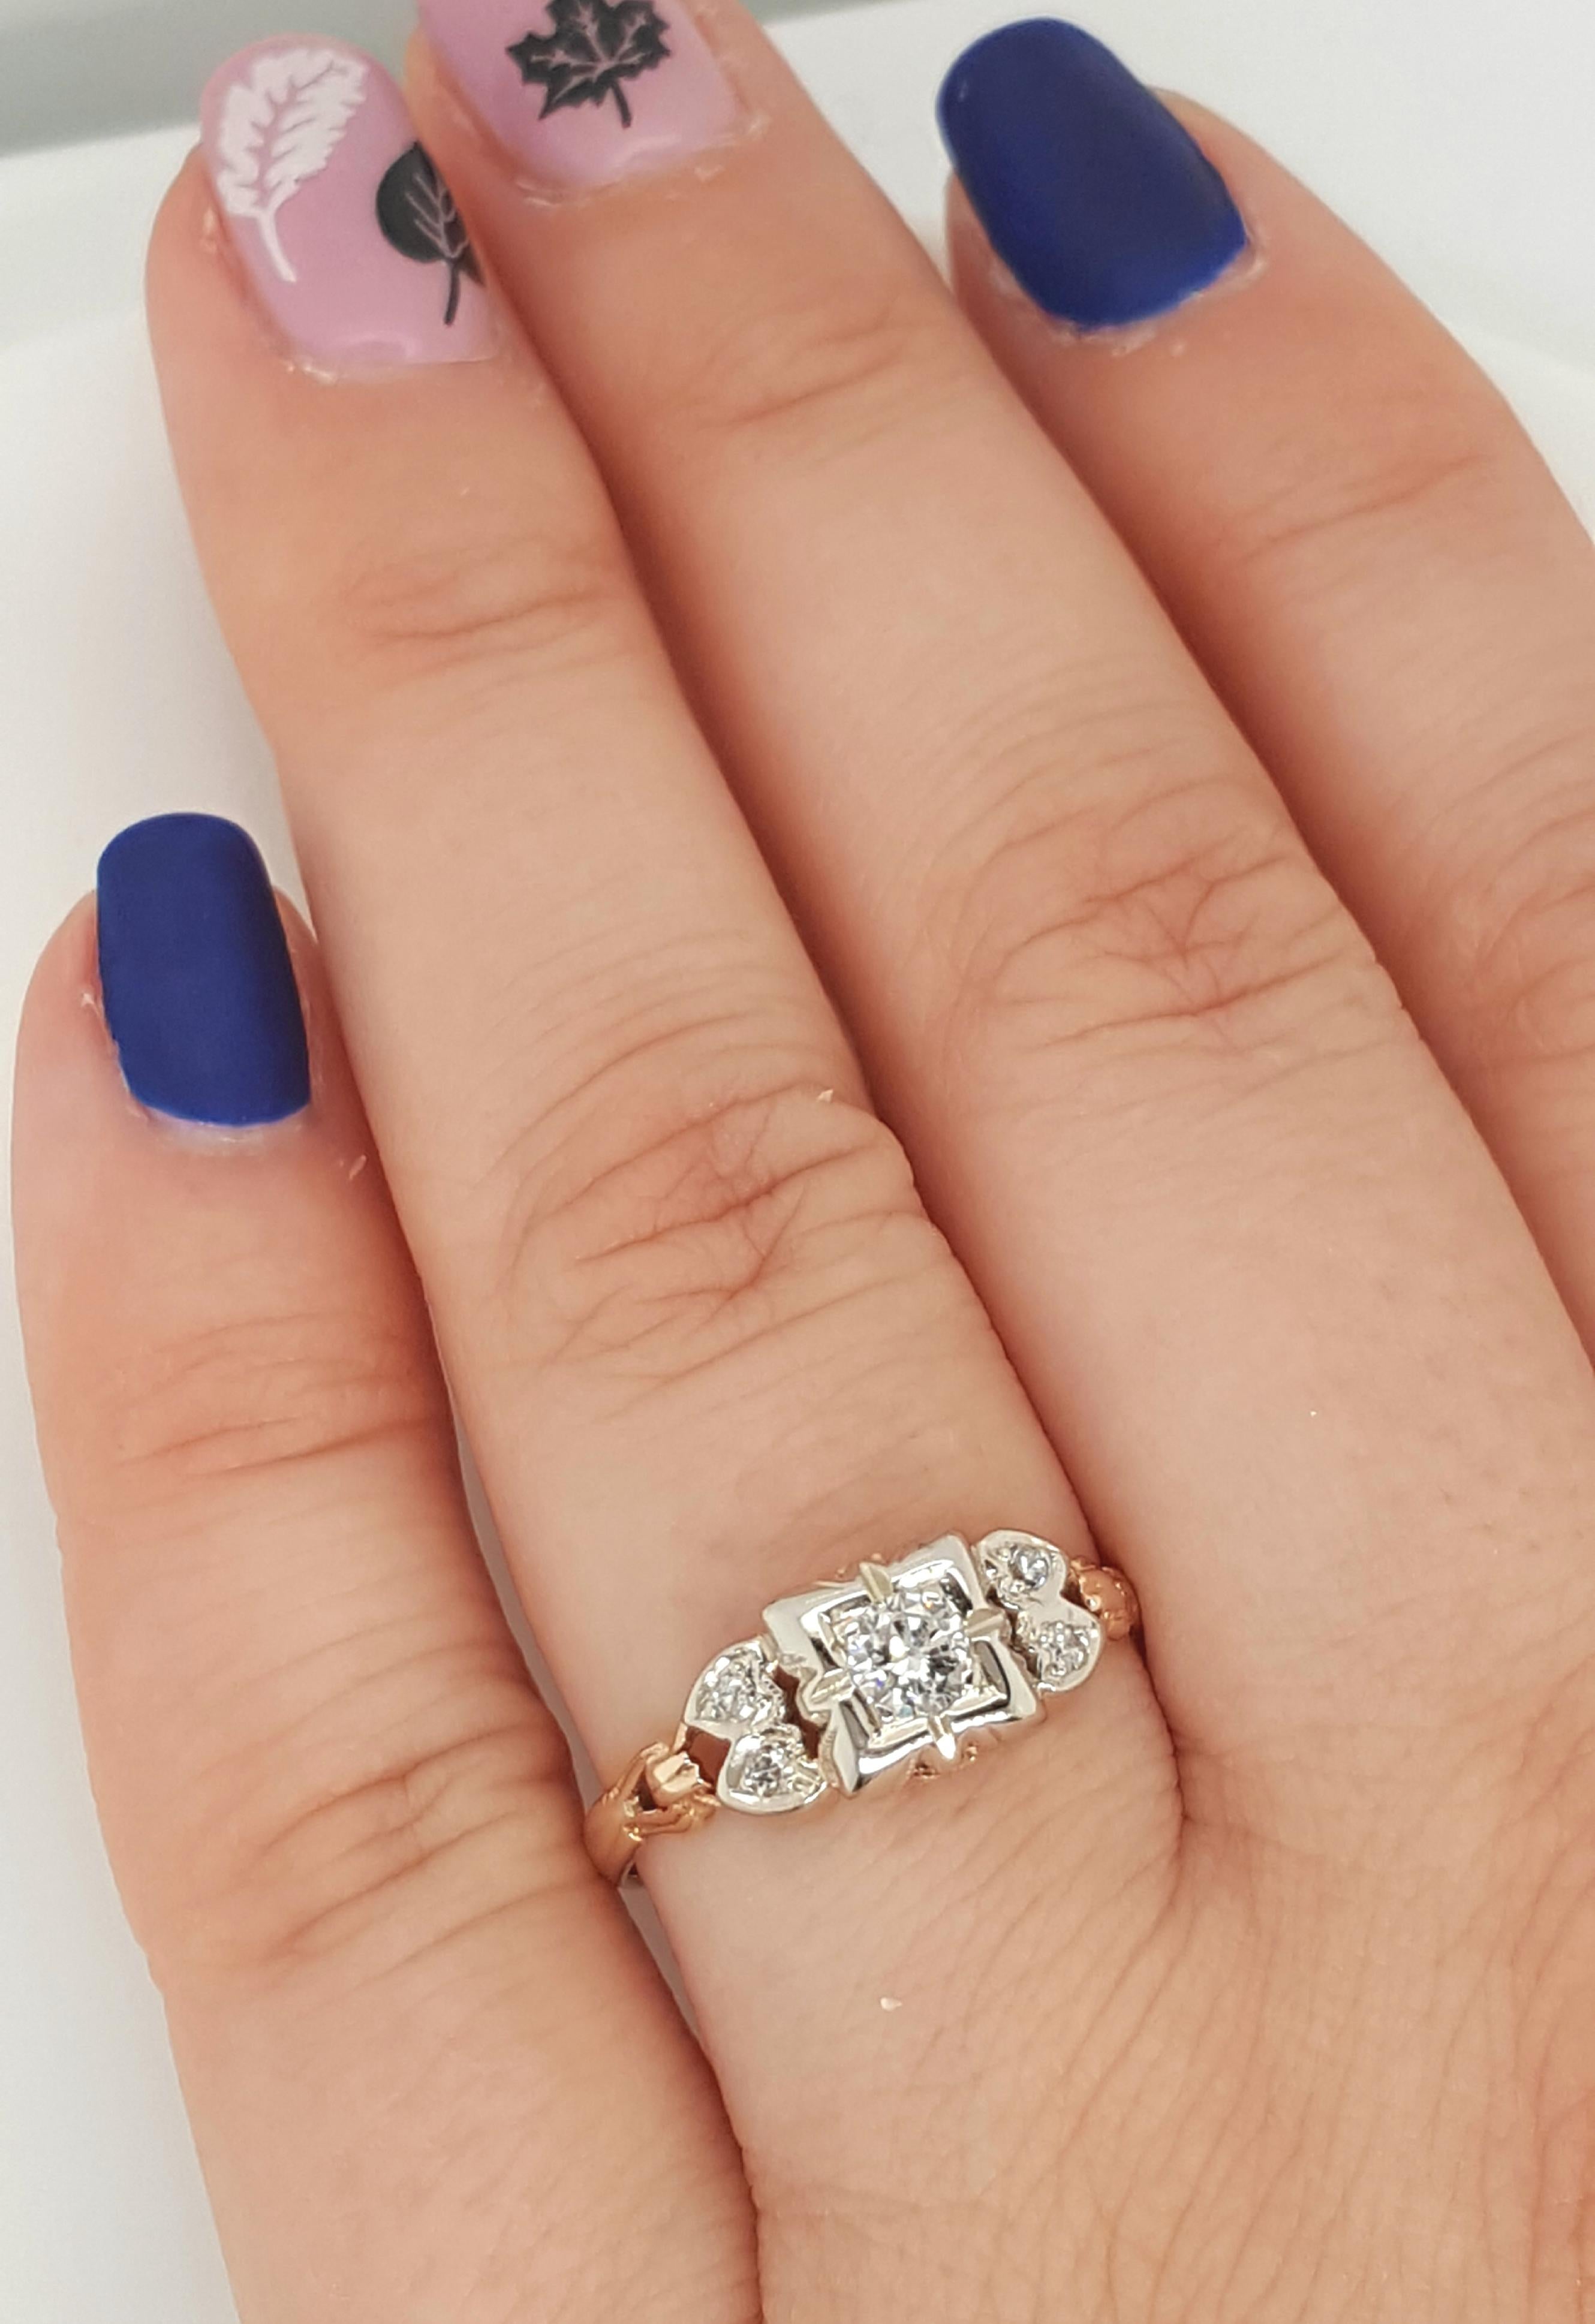 This fine example of Art Deco style is crafted in Two tone Gold with smaller diamond accents highlighting the stunning solitaire. The brilliant center Old European cut diamond is just under a half carat, top quality colorless 